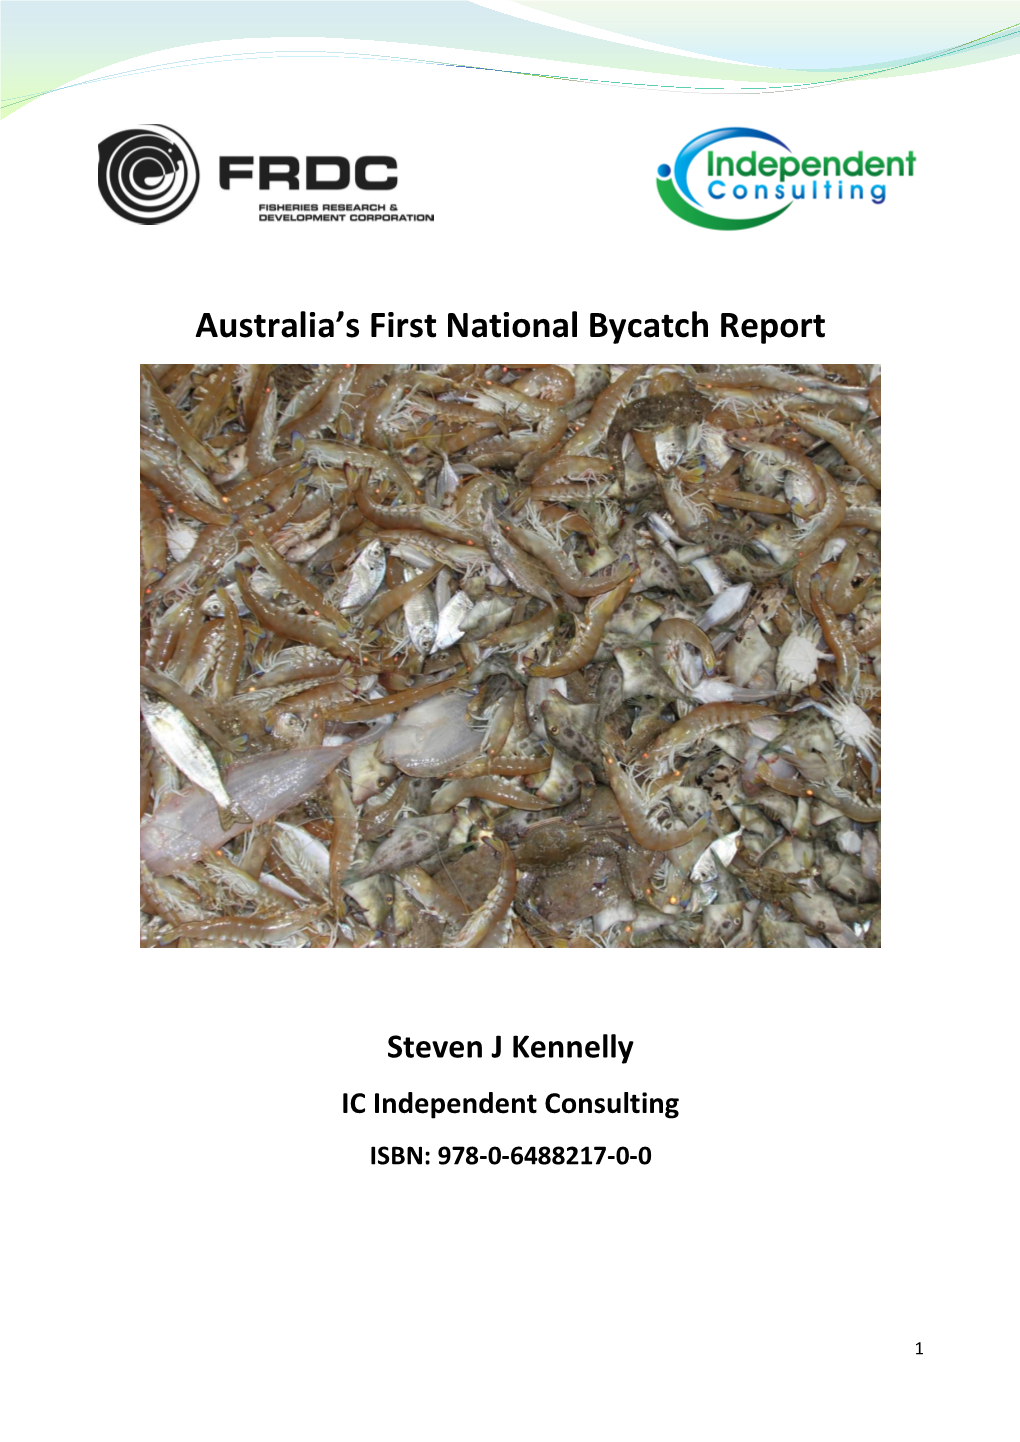 Australia's First National Bycatch Report